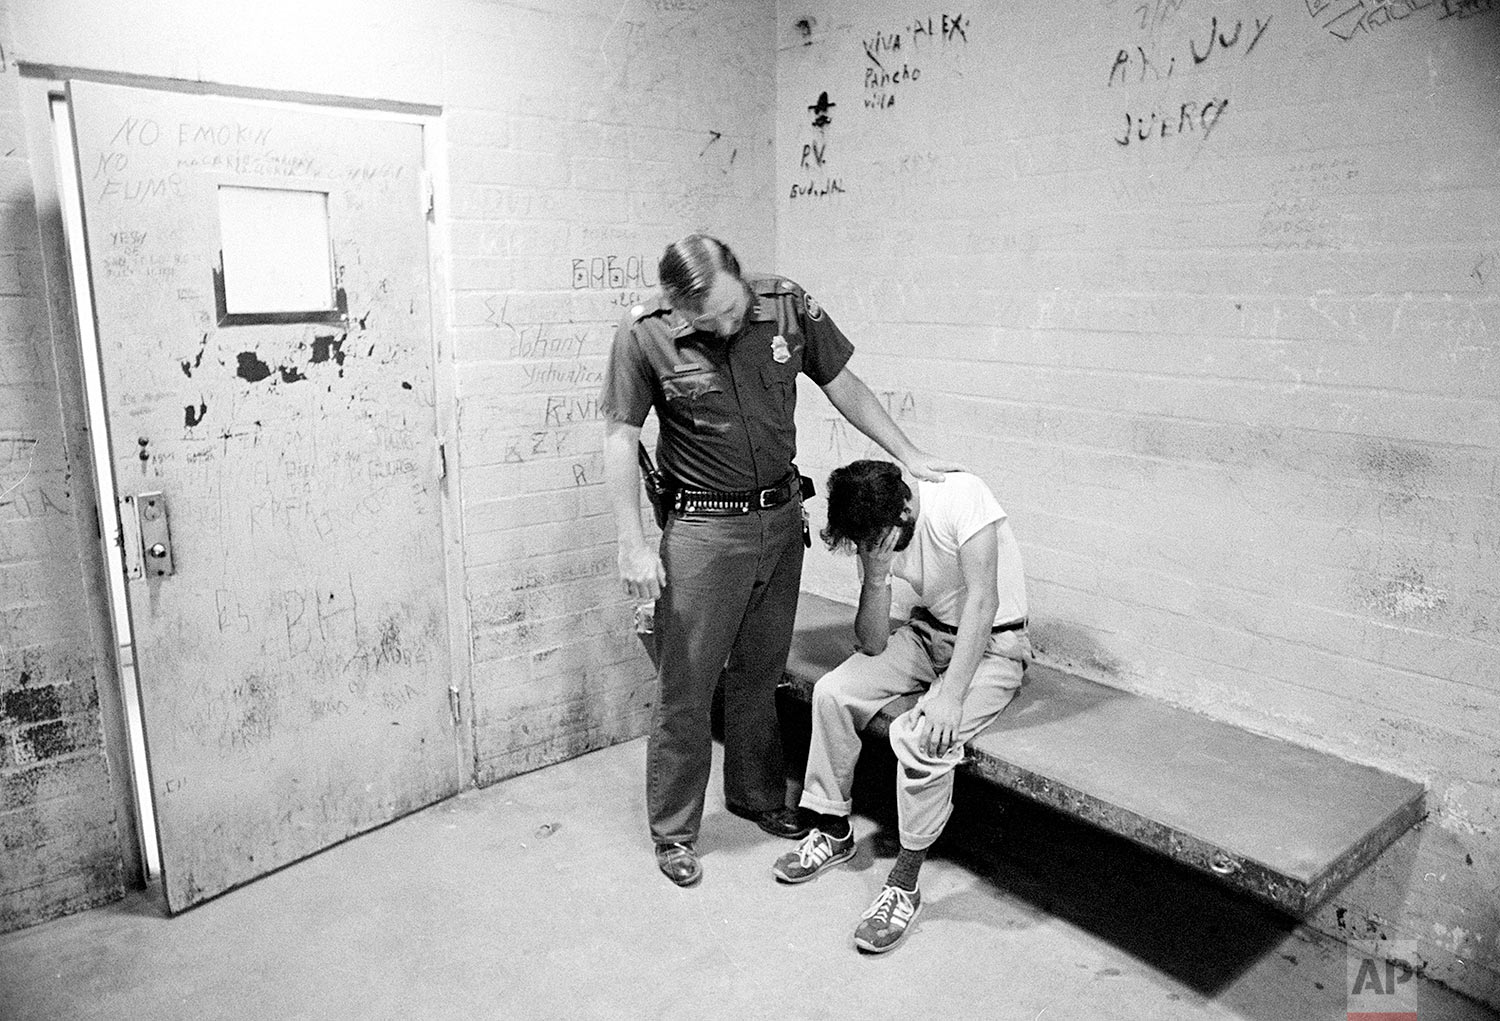  U.S. Border Patrol officer Ed Pyeatt consoles an unidentified illegal immigrant sitting in a cell at Chula Vista station, a border town to Mexico, August 18, 1981. "With a government that doesn't care for them, indecent living conditions and poverty